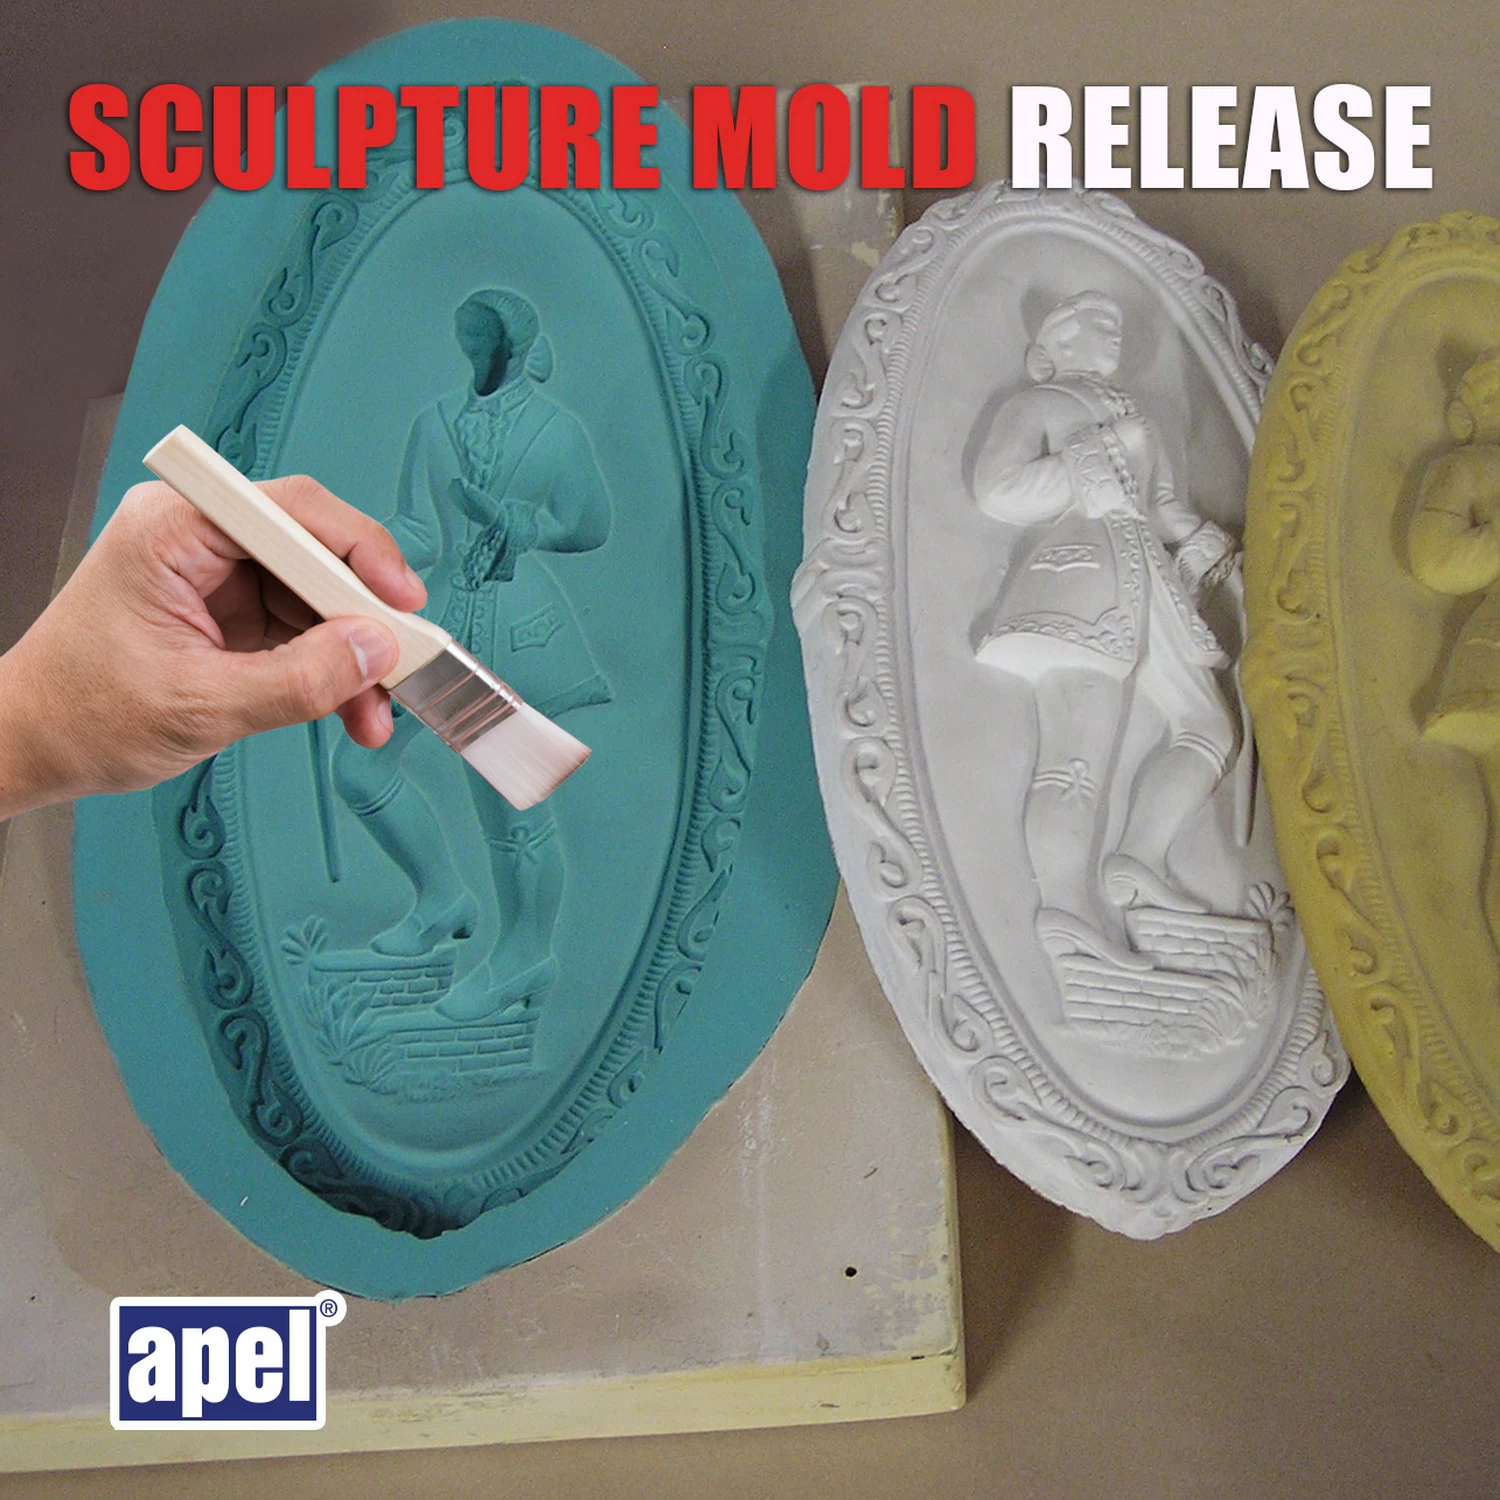 Mold Release